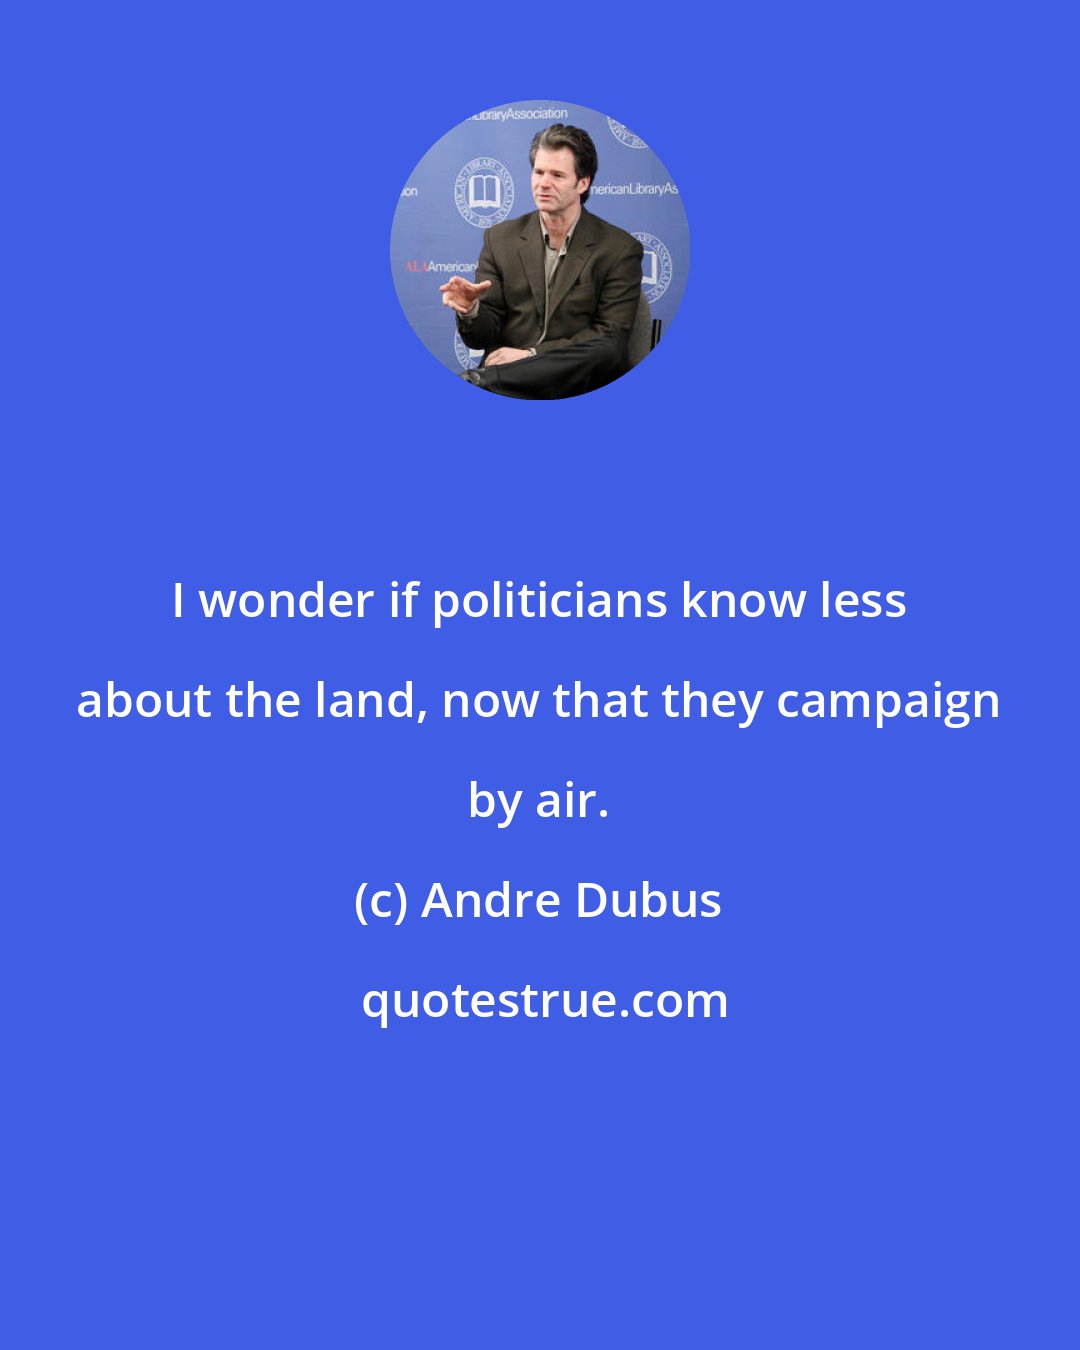 Andre Dubus: I wonder if politicians know less about the land, now that they campaign by air.